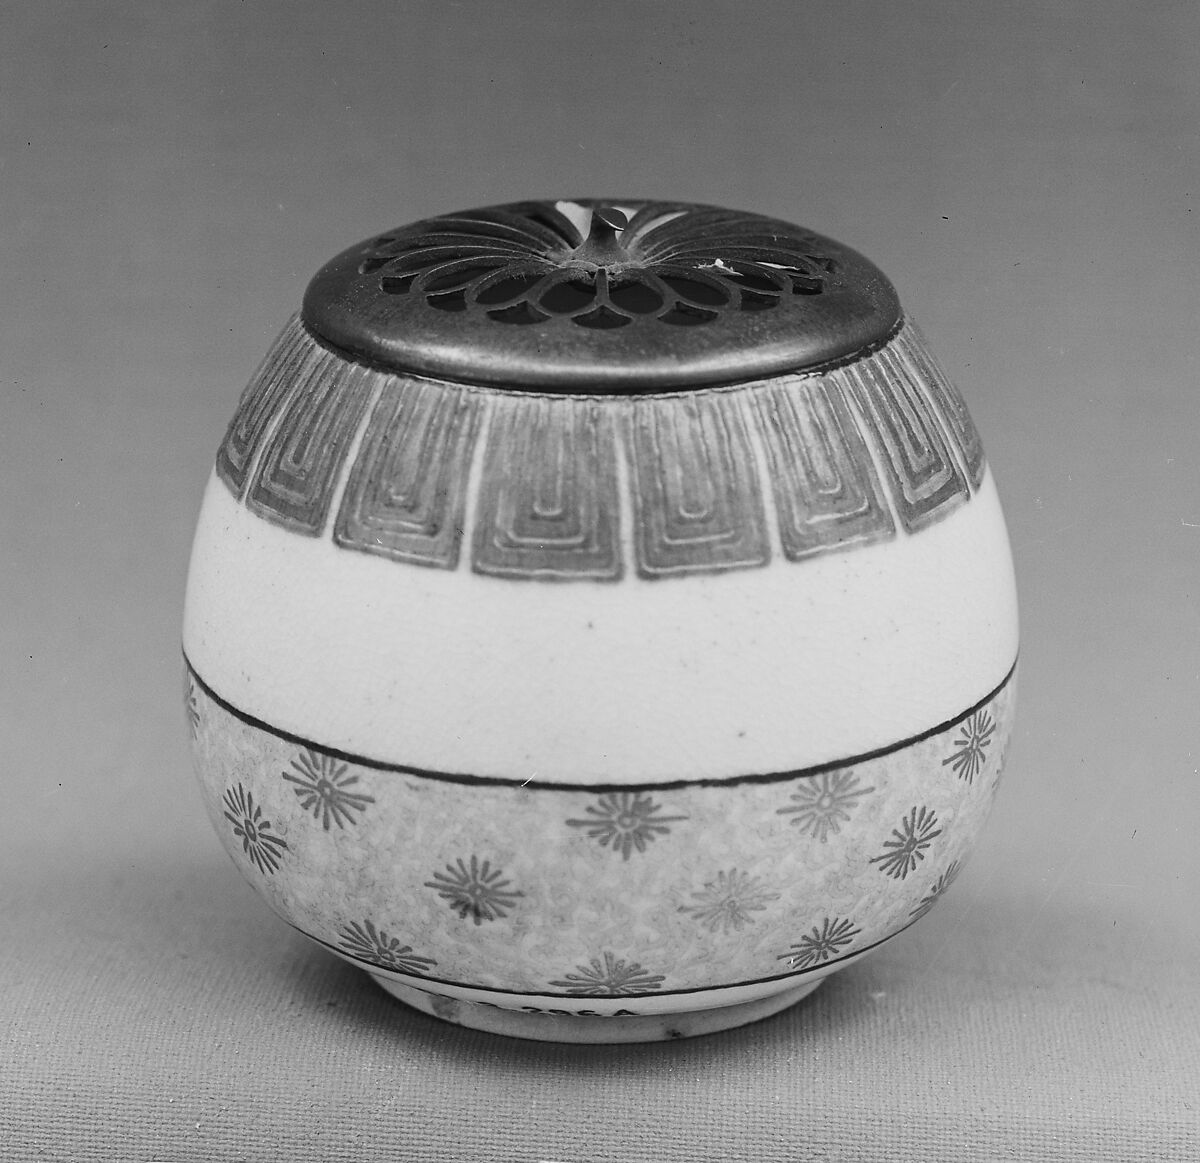 Incense Burner, Clay covered with a crackled glaze and decorated with enamels and gold (Satsuma ware), Japan 